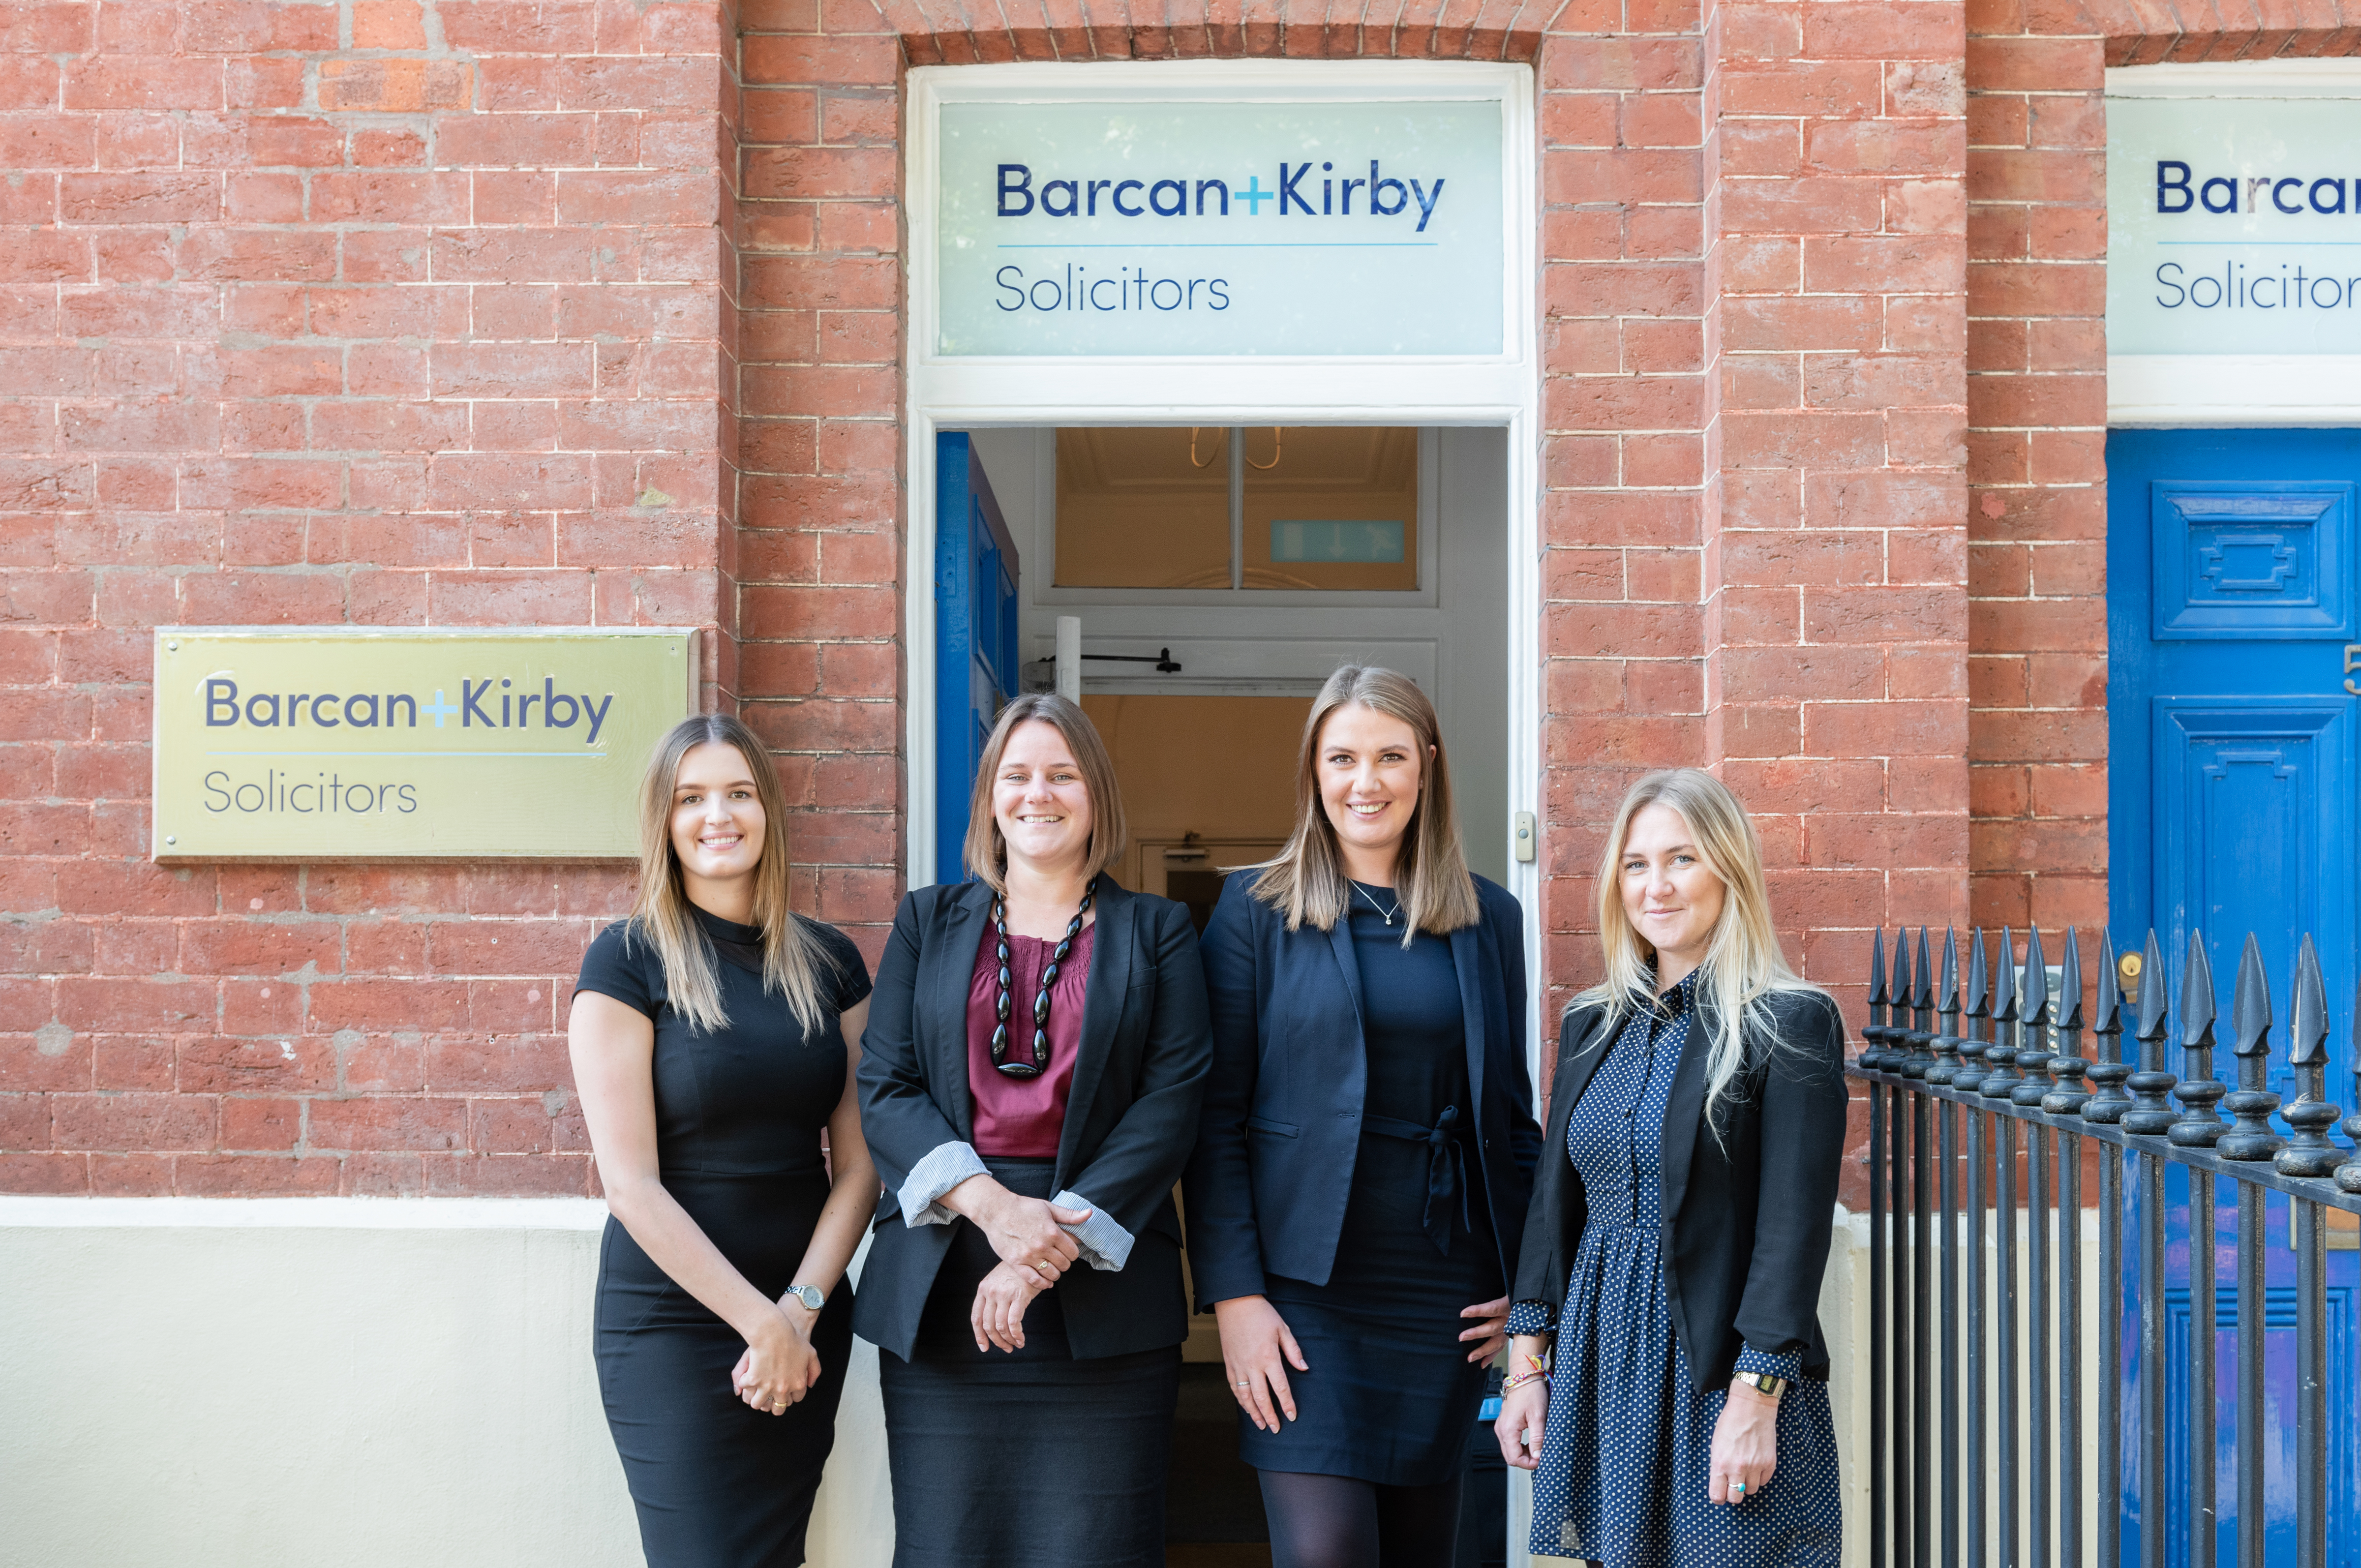 barcan-kirby-trainee-solicitors